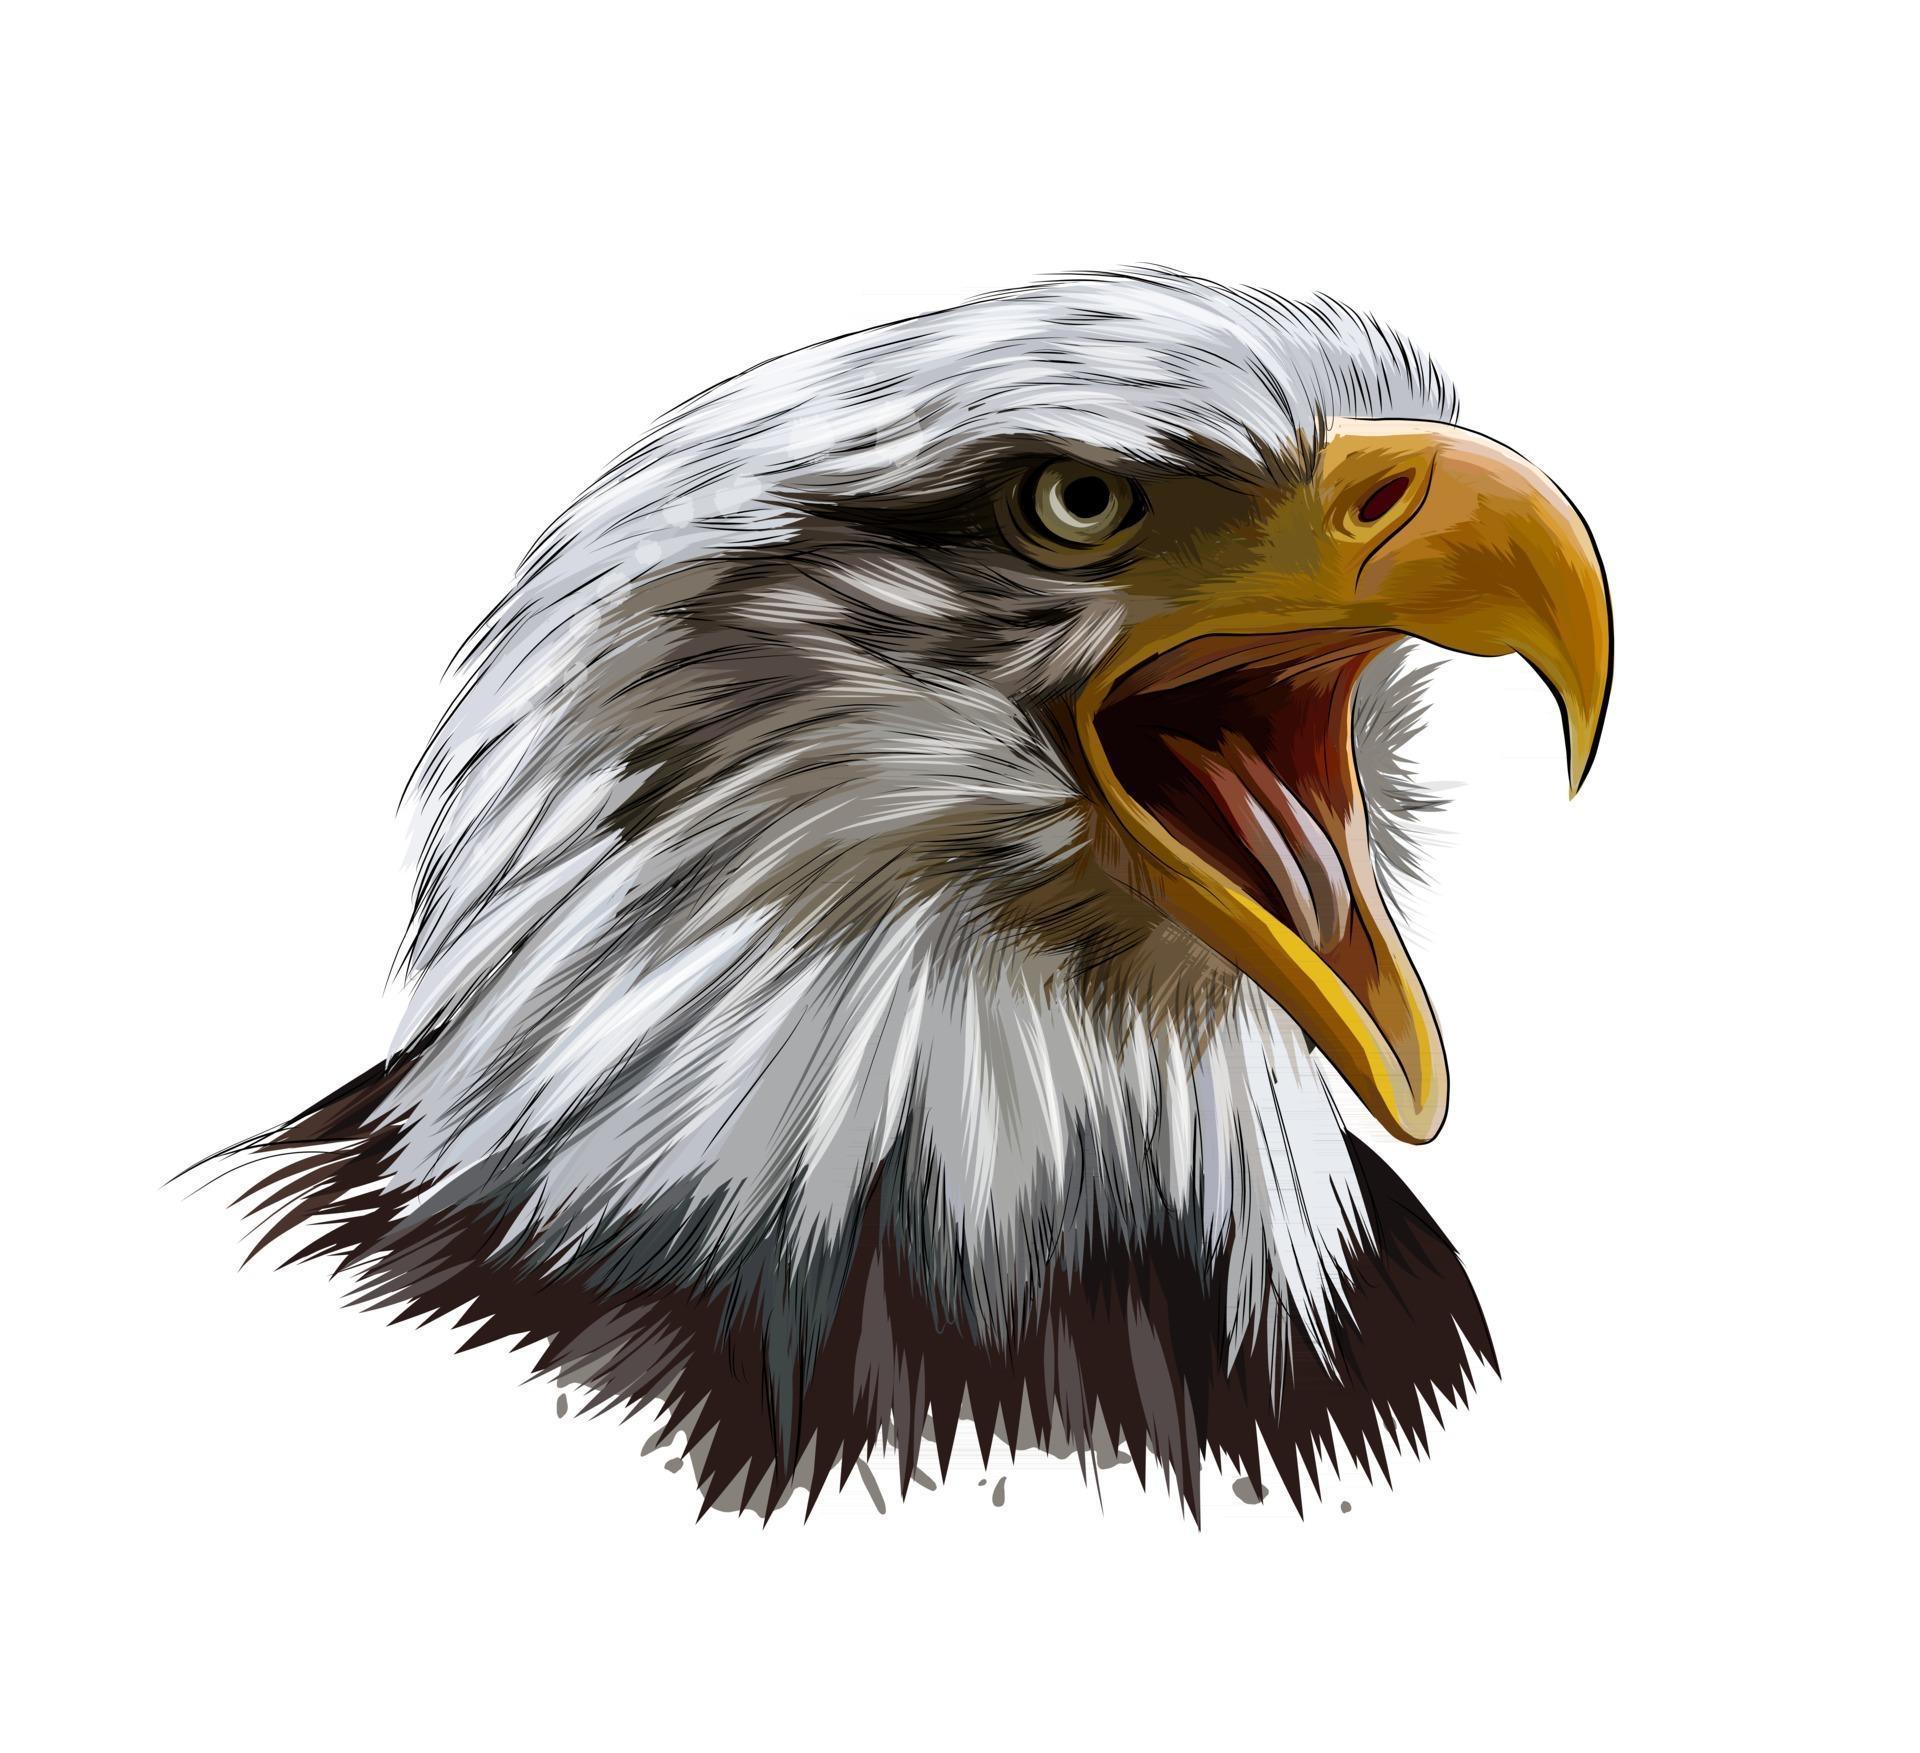 Bald eagle head portrait from a splash of watercolor, colored drawing